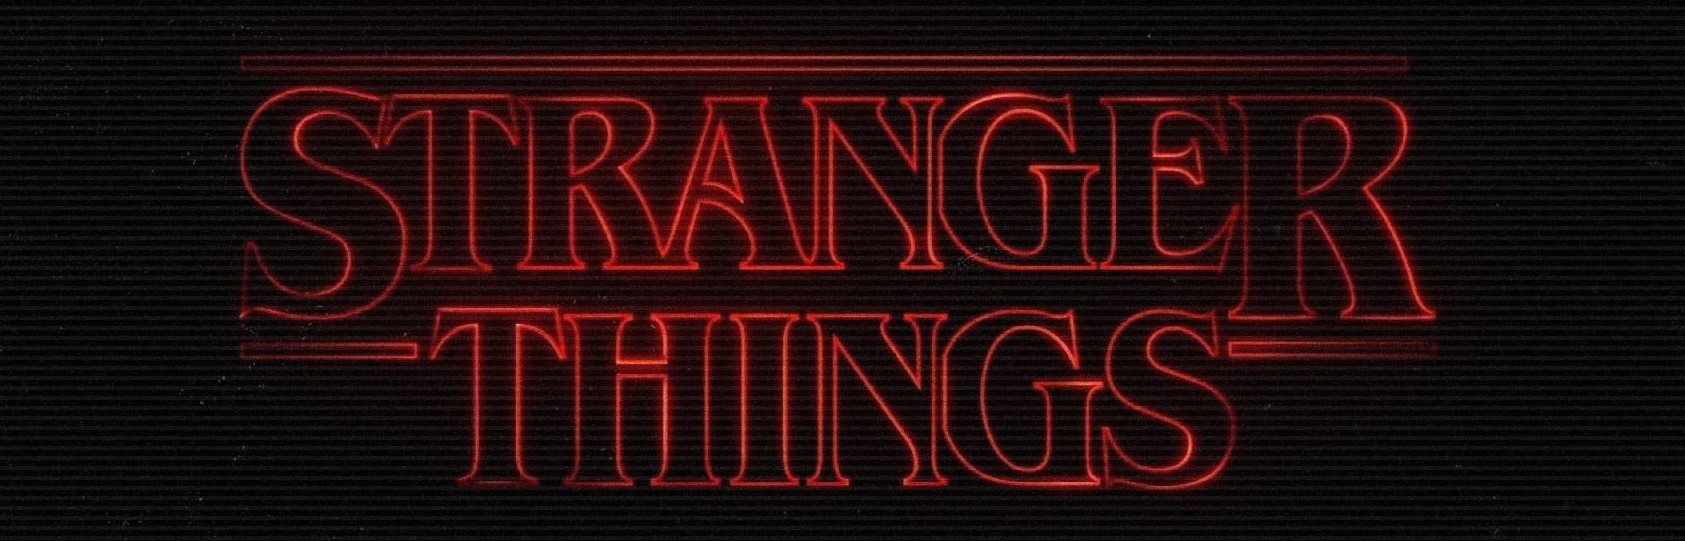 STRANGER THINGS S01 S02 S03 - CZ TITULKY - HD 1080p na FASTSHARE